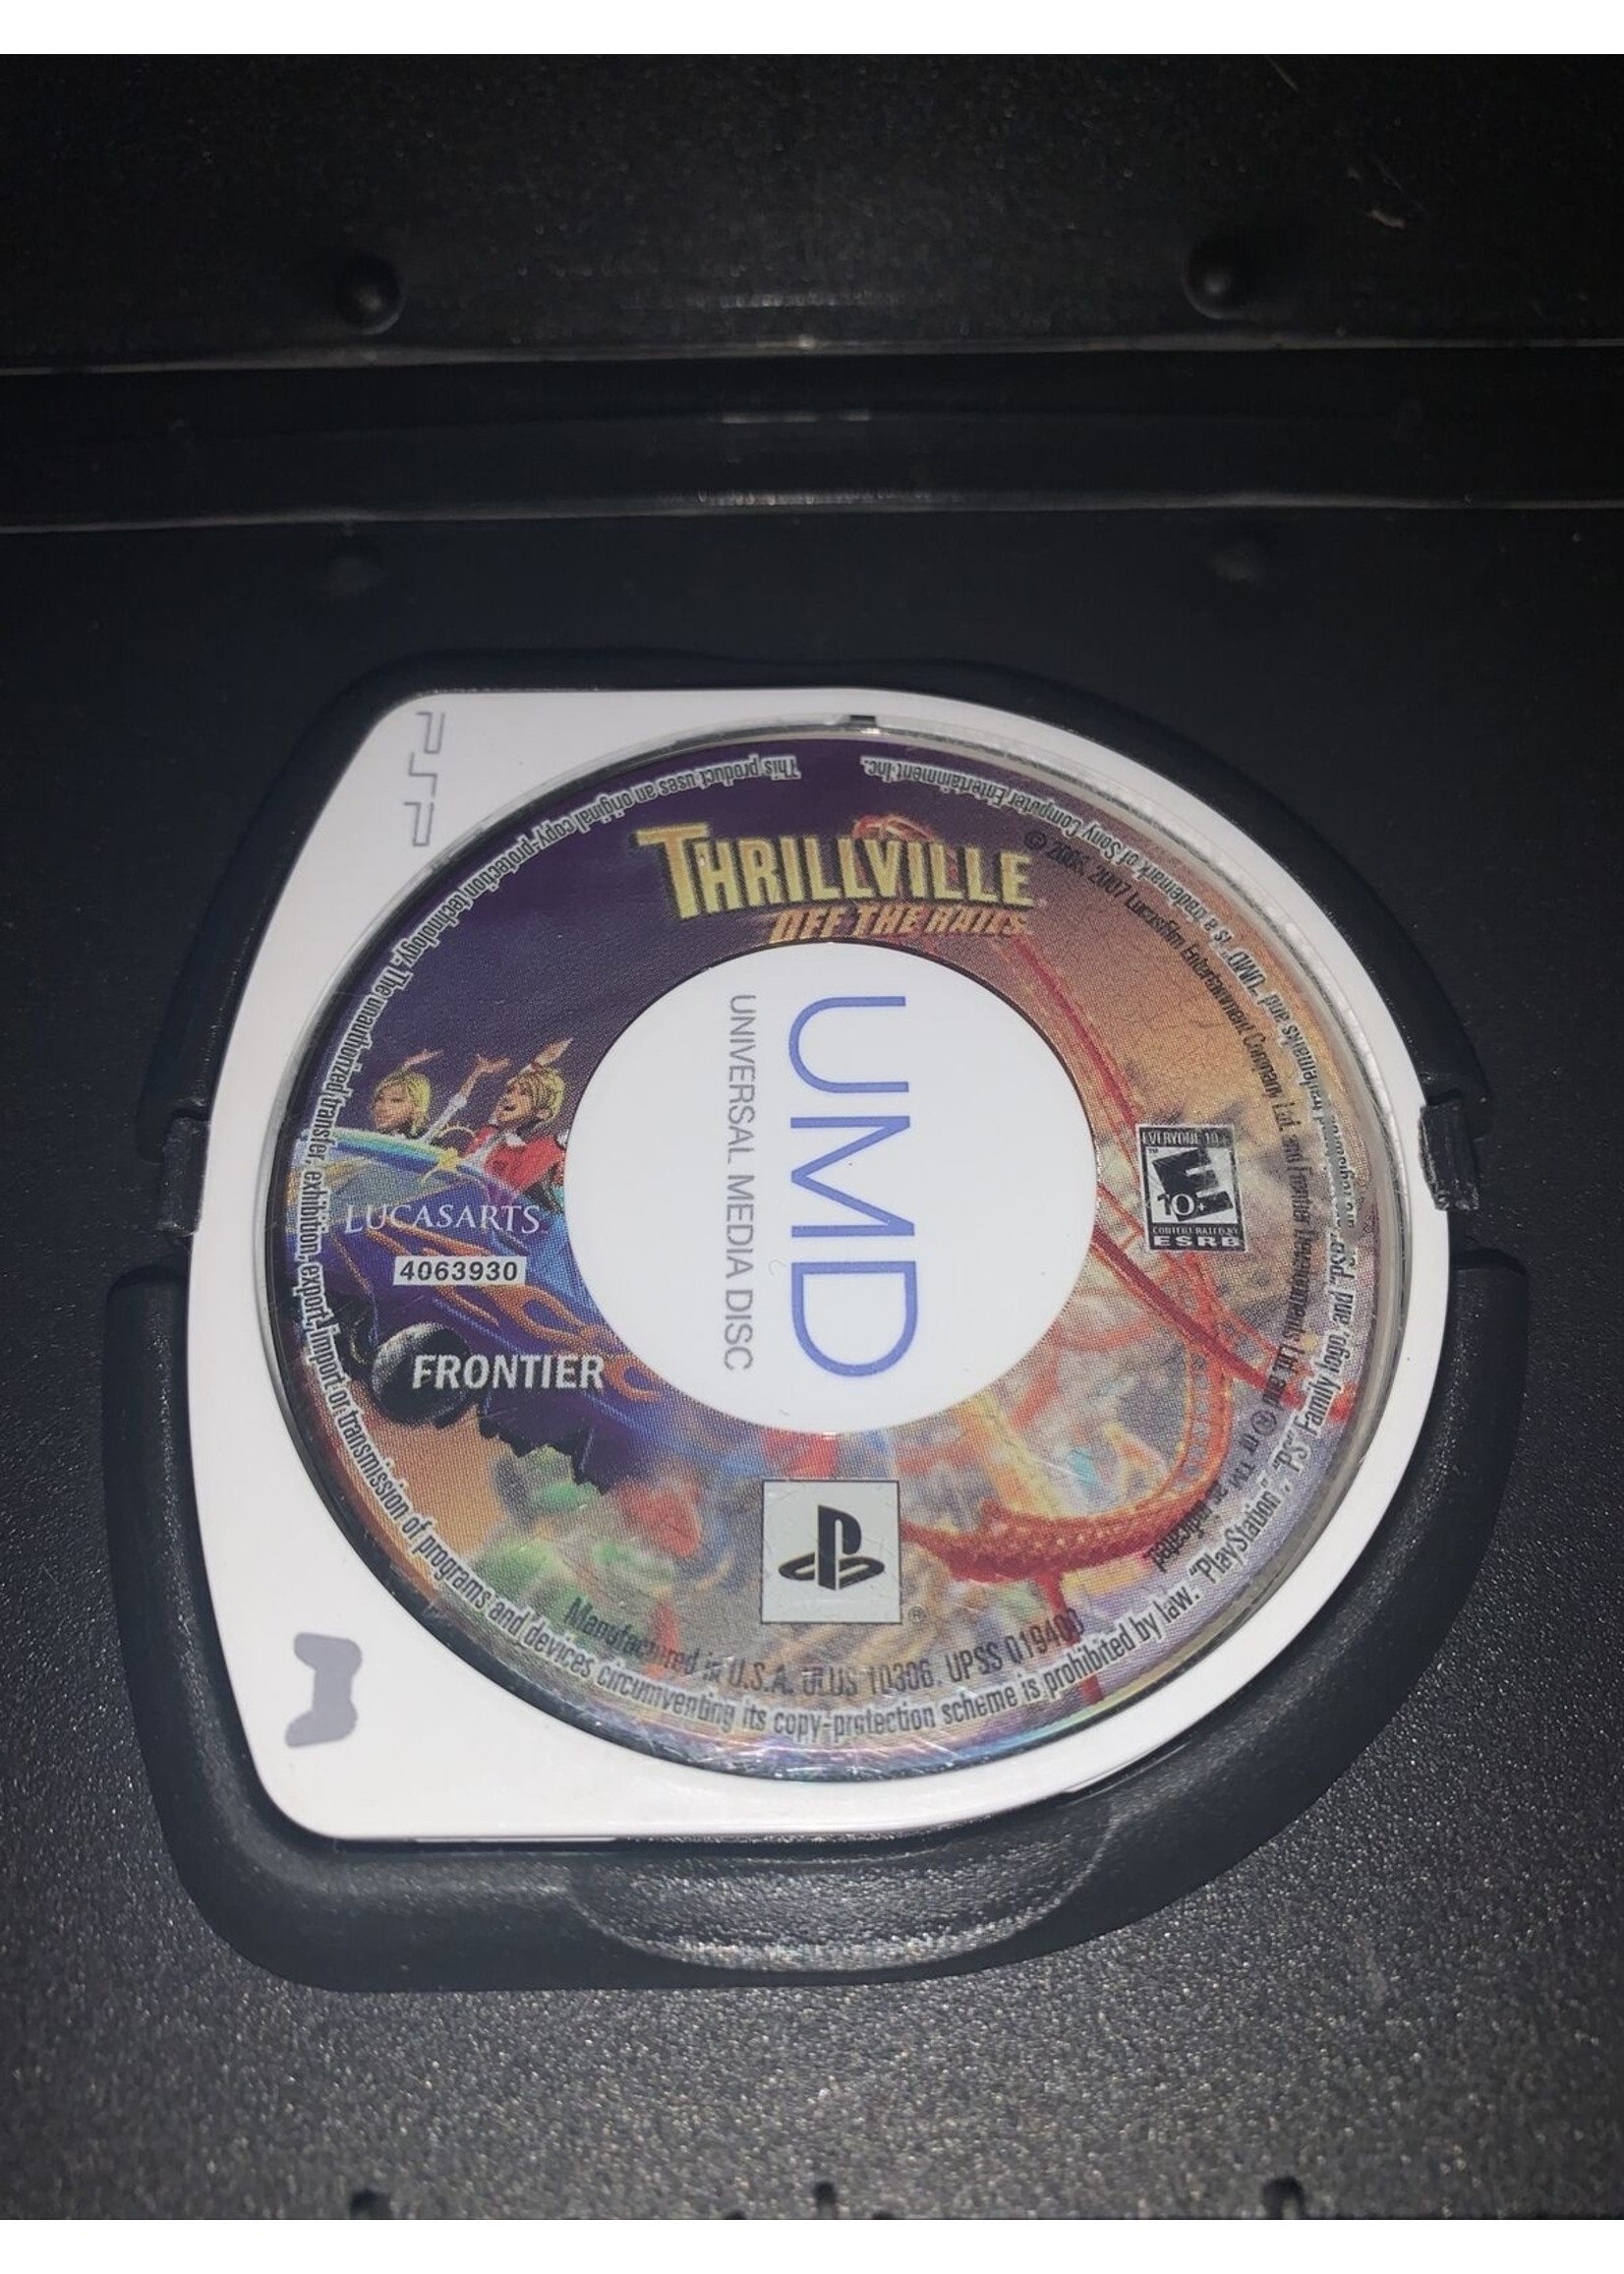 Sony Playstation Portable (PSP) Thrillville Off The Rails (Game Only)